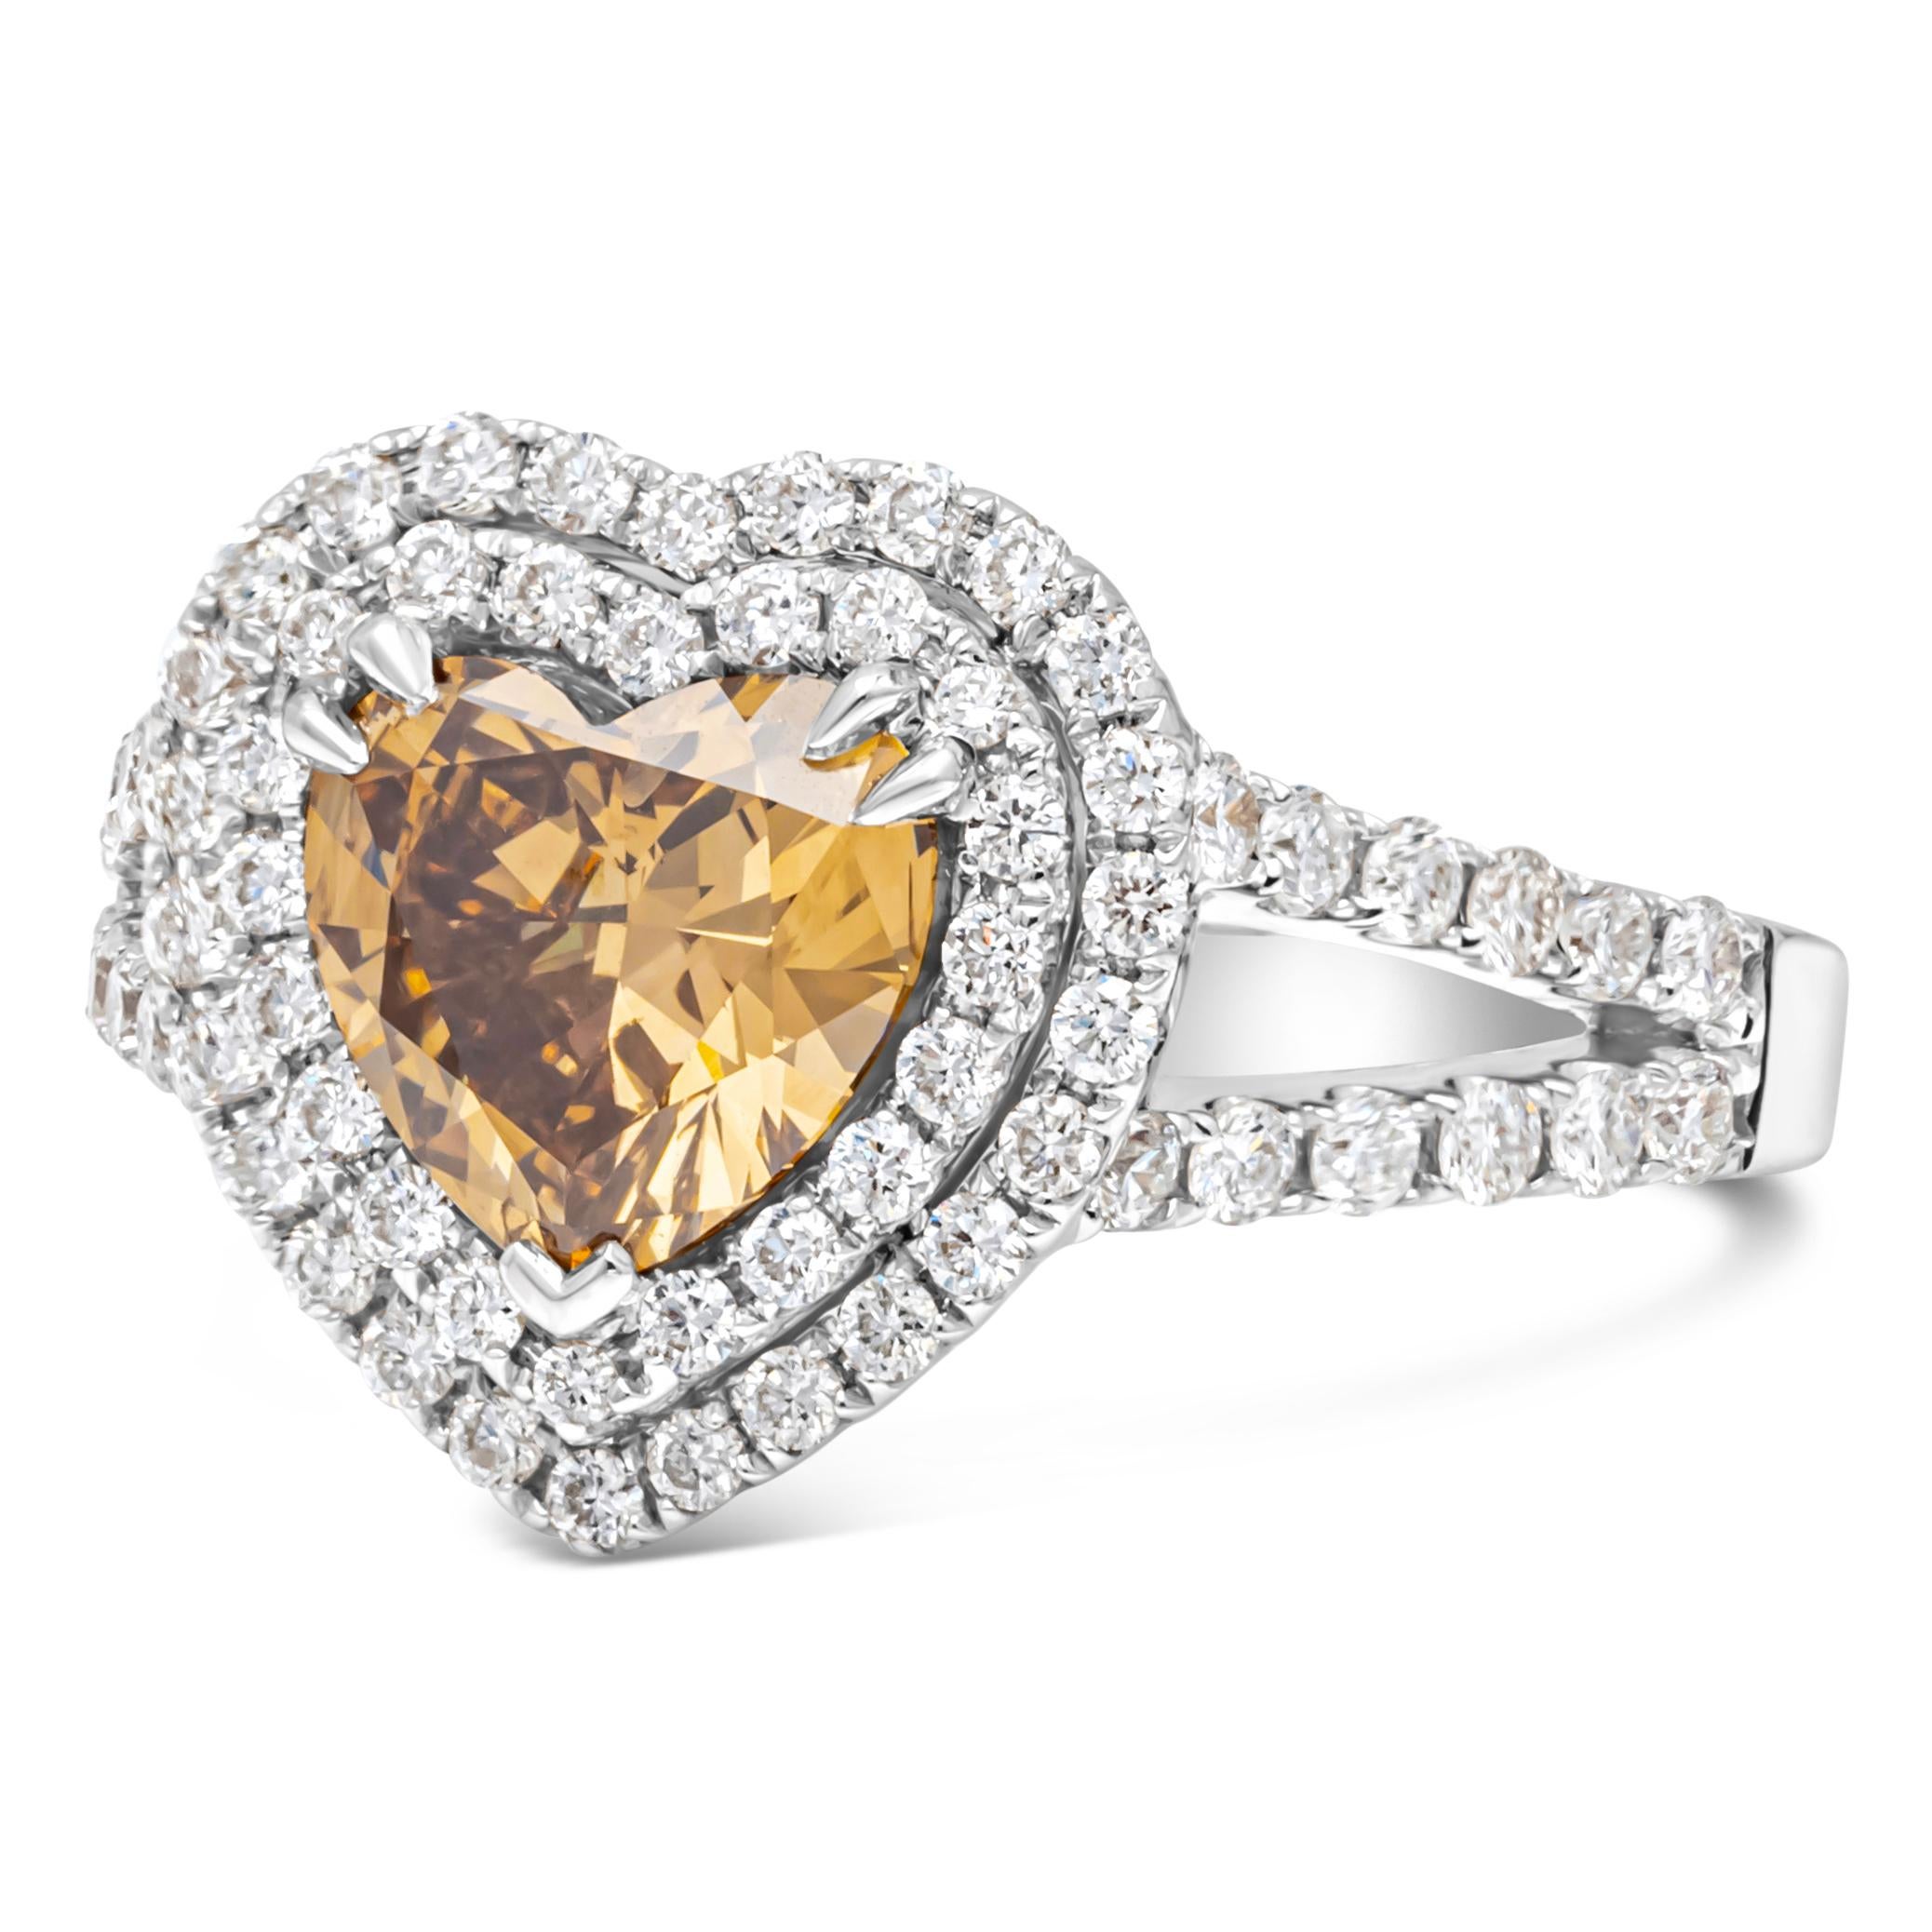 Elegant and color rich 1.45 carats heart shape diamond certified by GIA as Fancy Dark Brown Yellow color, SI2 in clarity. Surrounding the center stone are double halo accented with round brilliant diamonds all the way to the split shank, set half